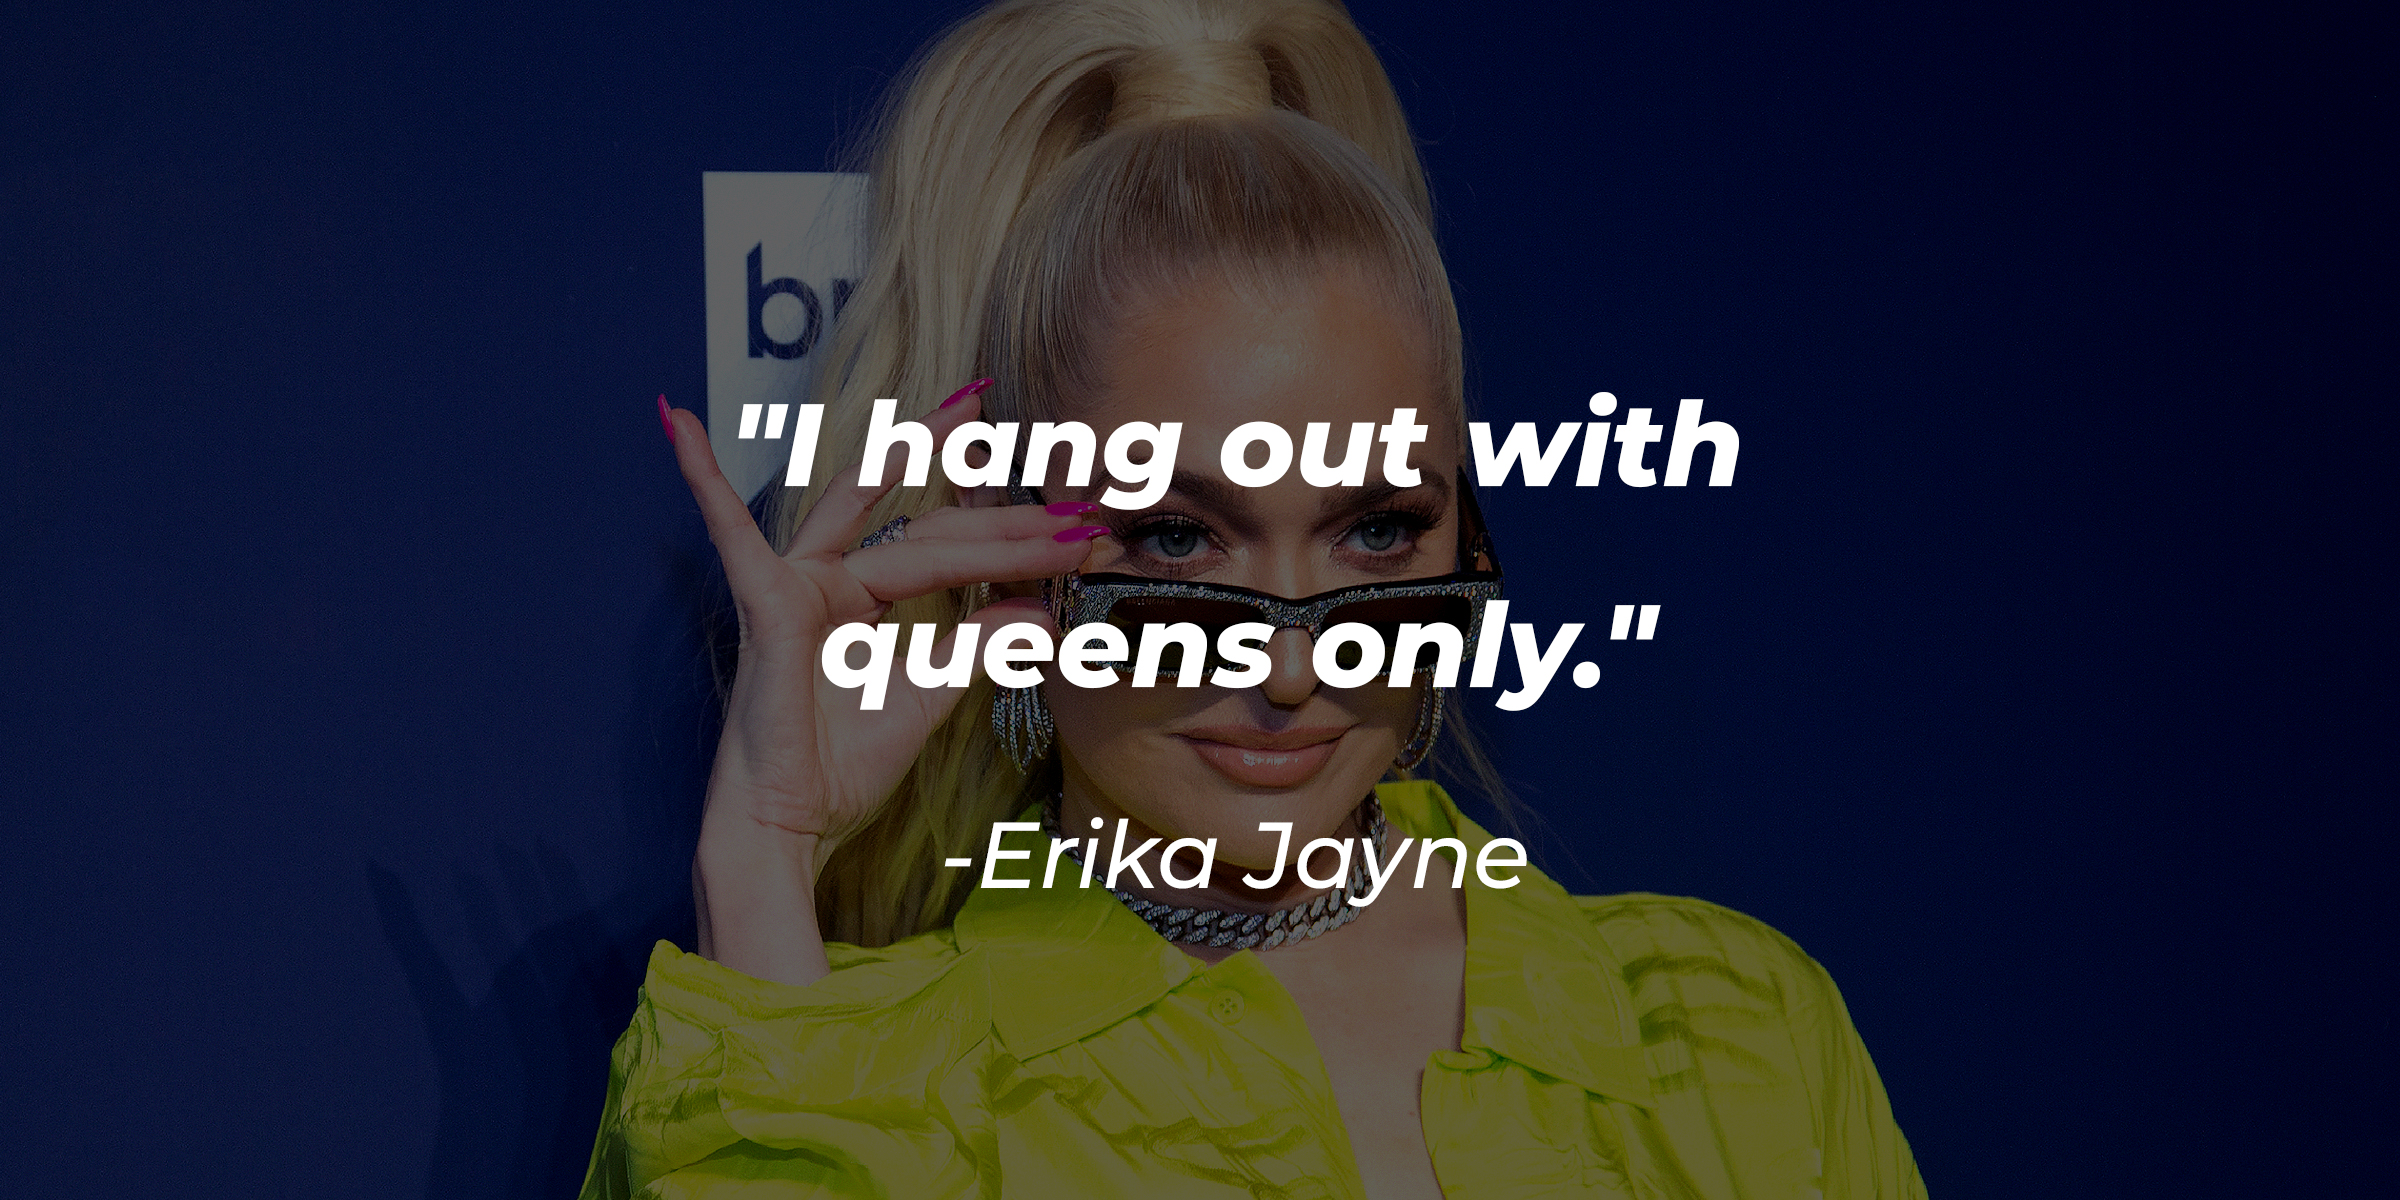 Erika Jayne’s quote: "I hang out with queens only." | Source: Getty Images